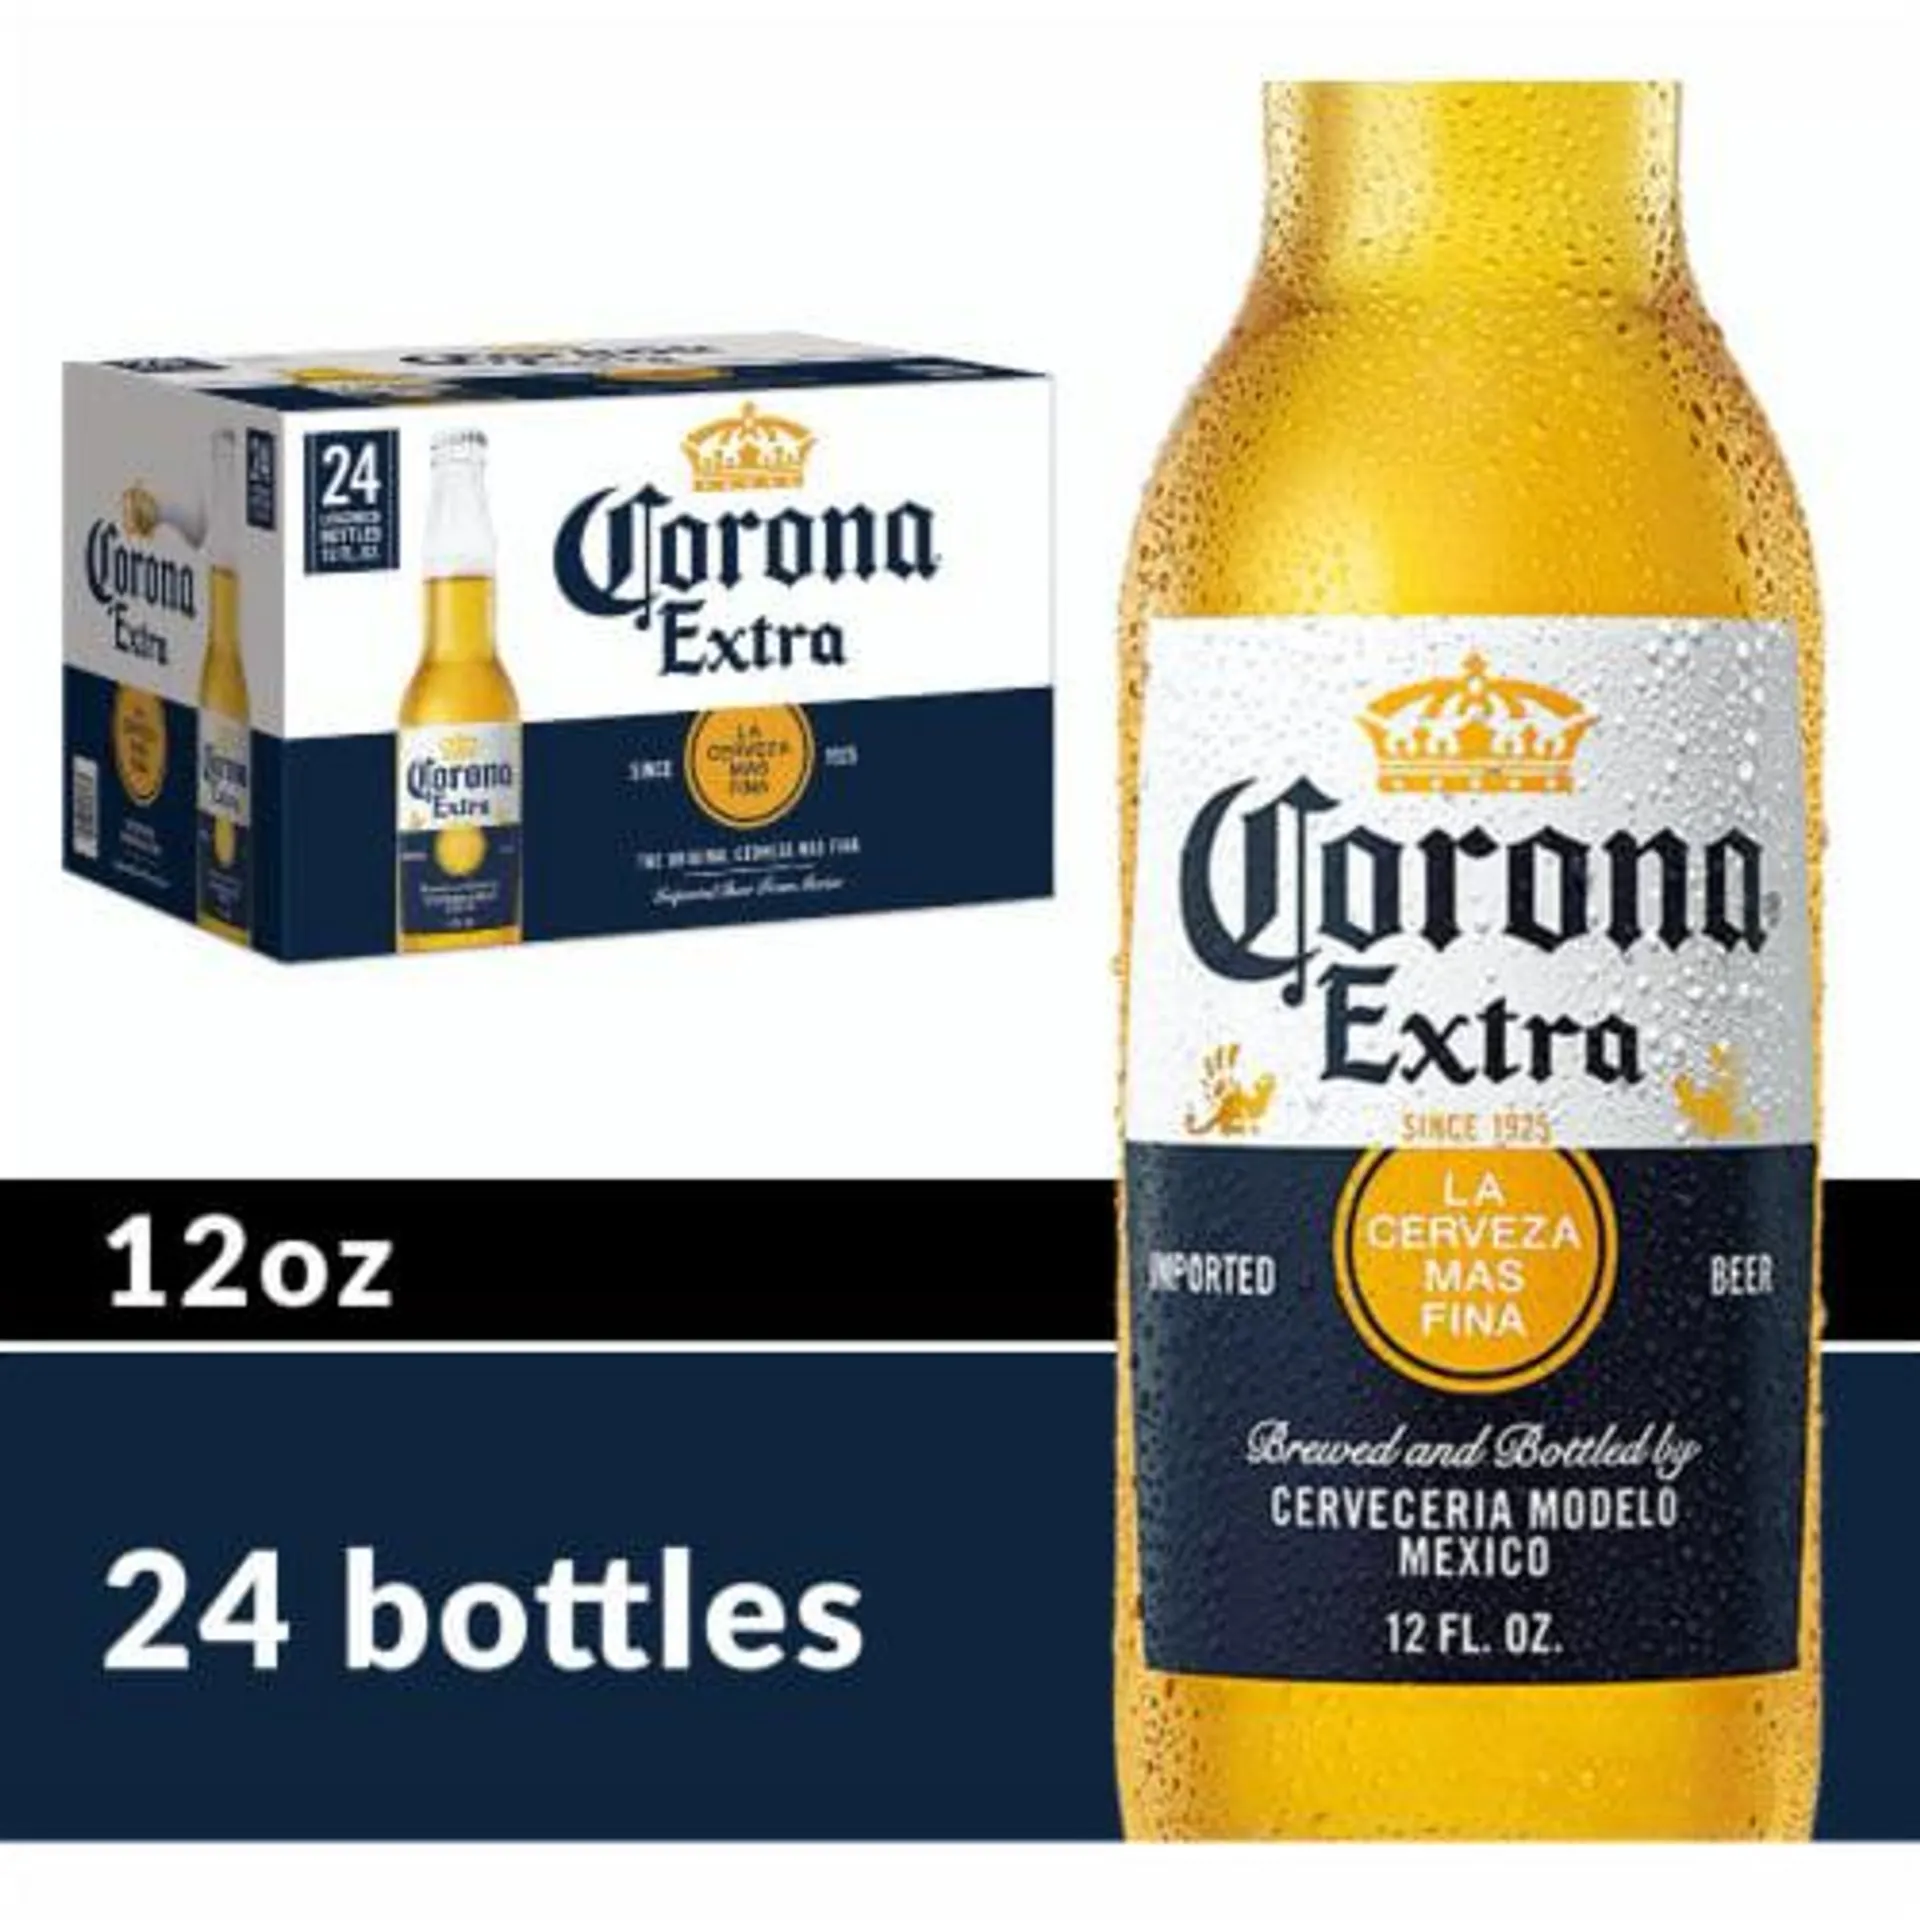 Corona Extra Mexican Lager Import Beer